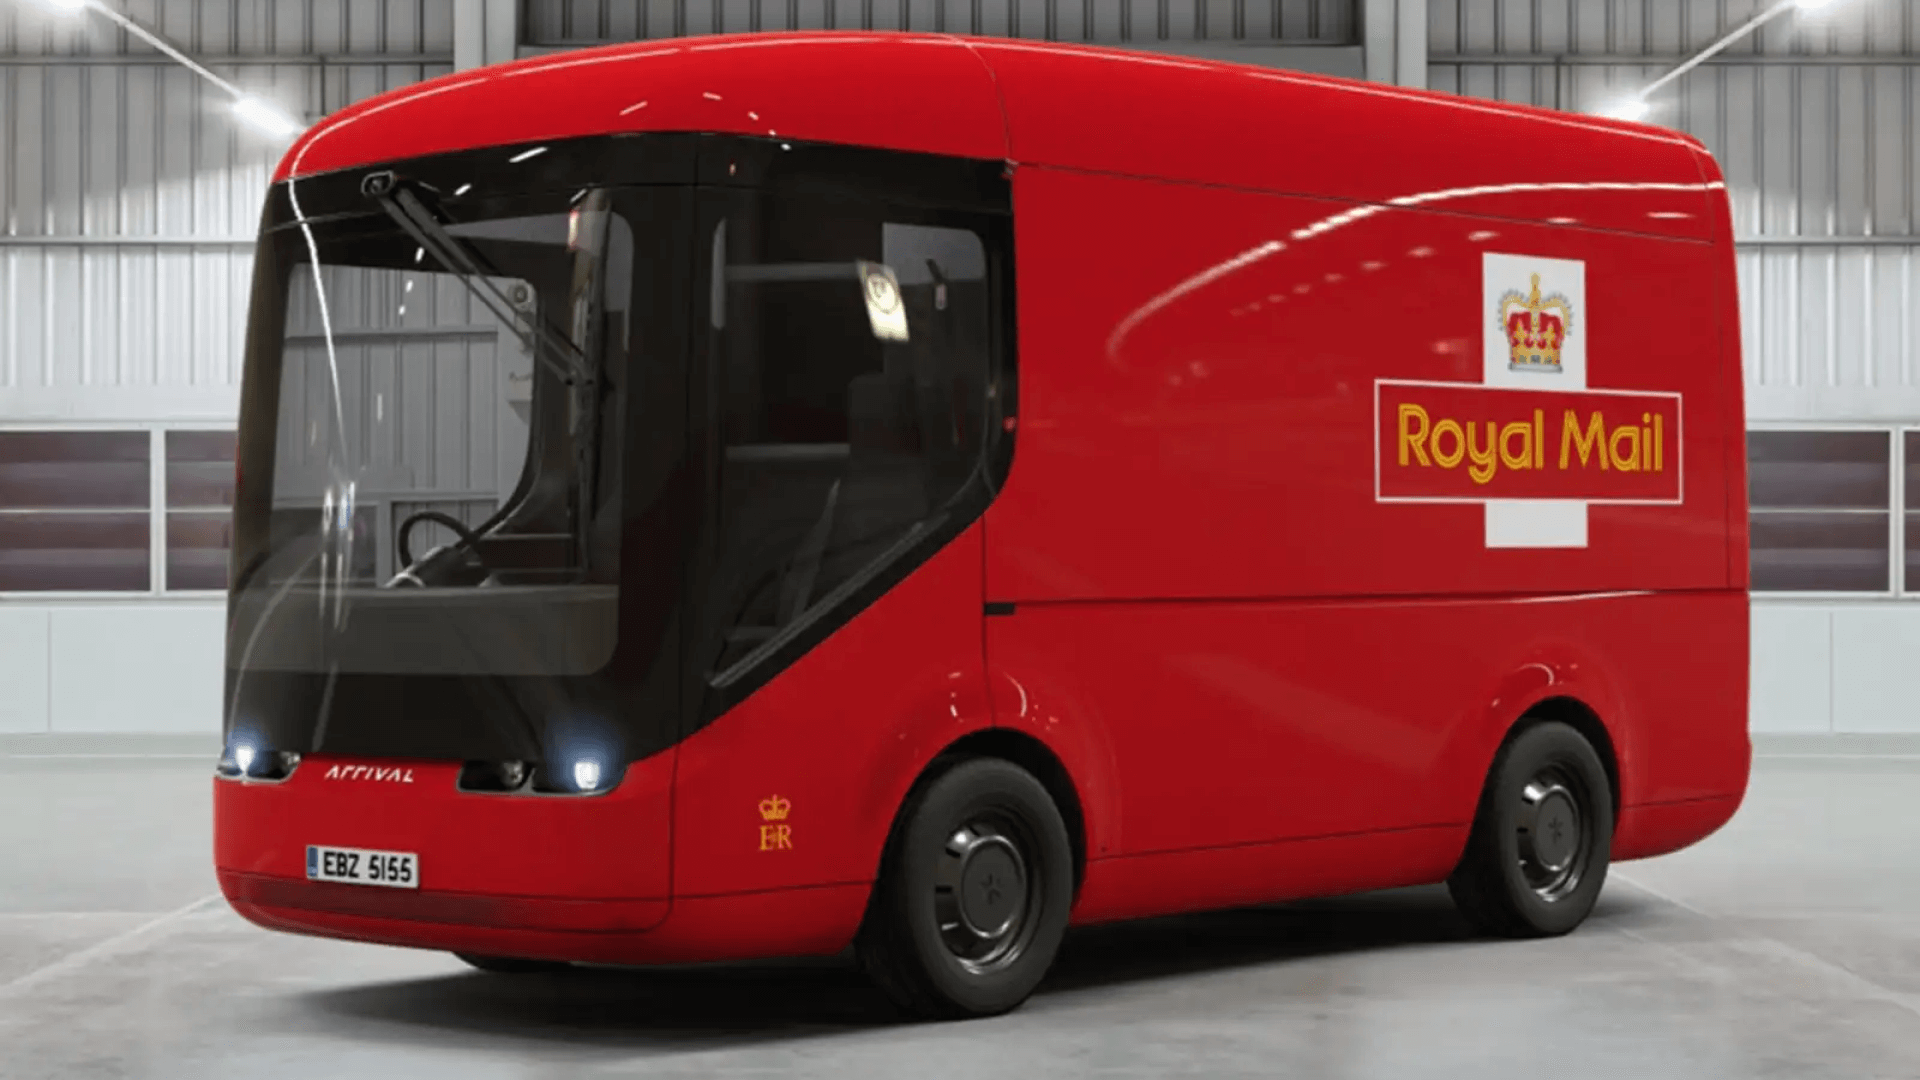 Arrival Royal Mail vehicle